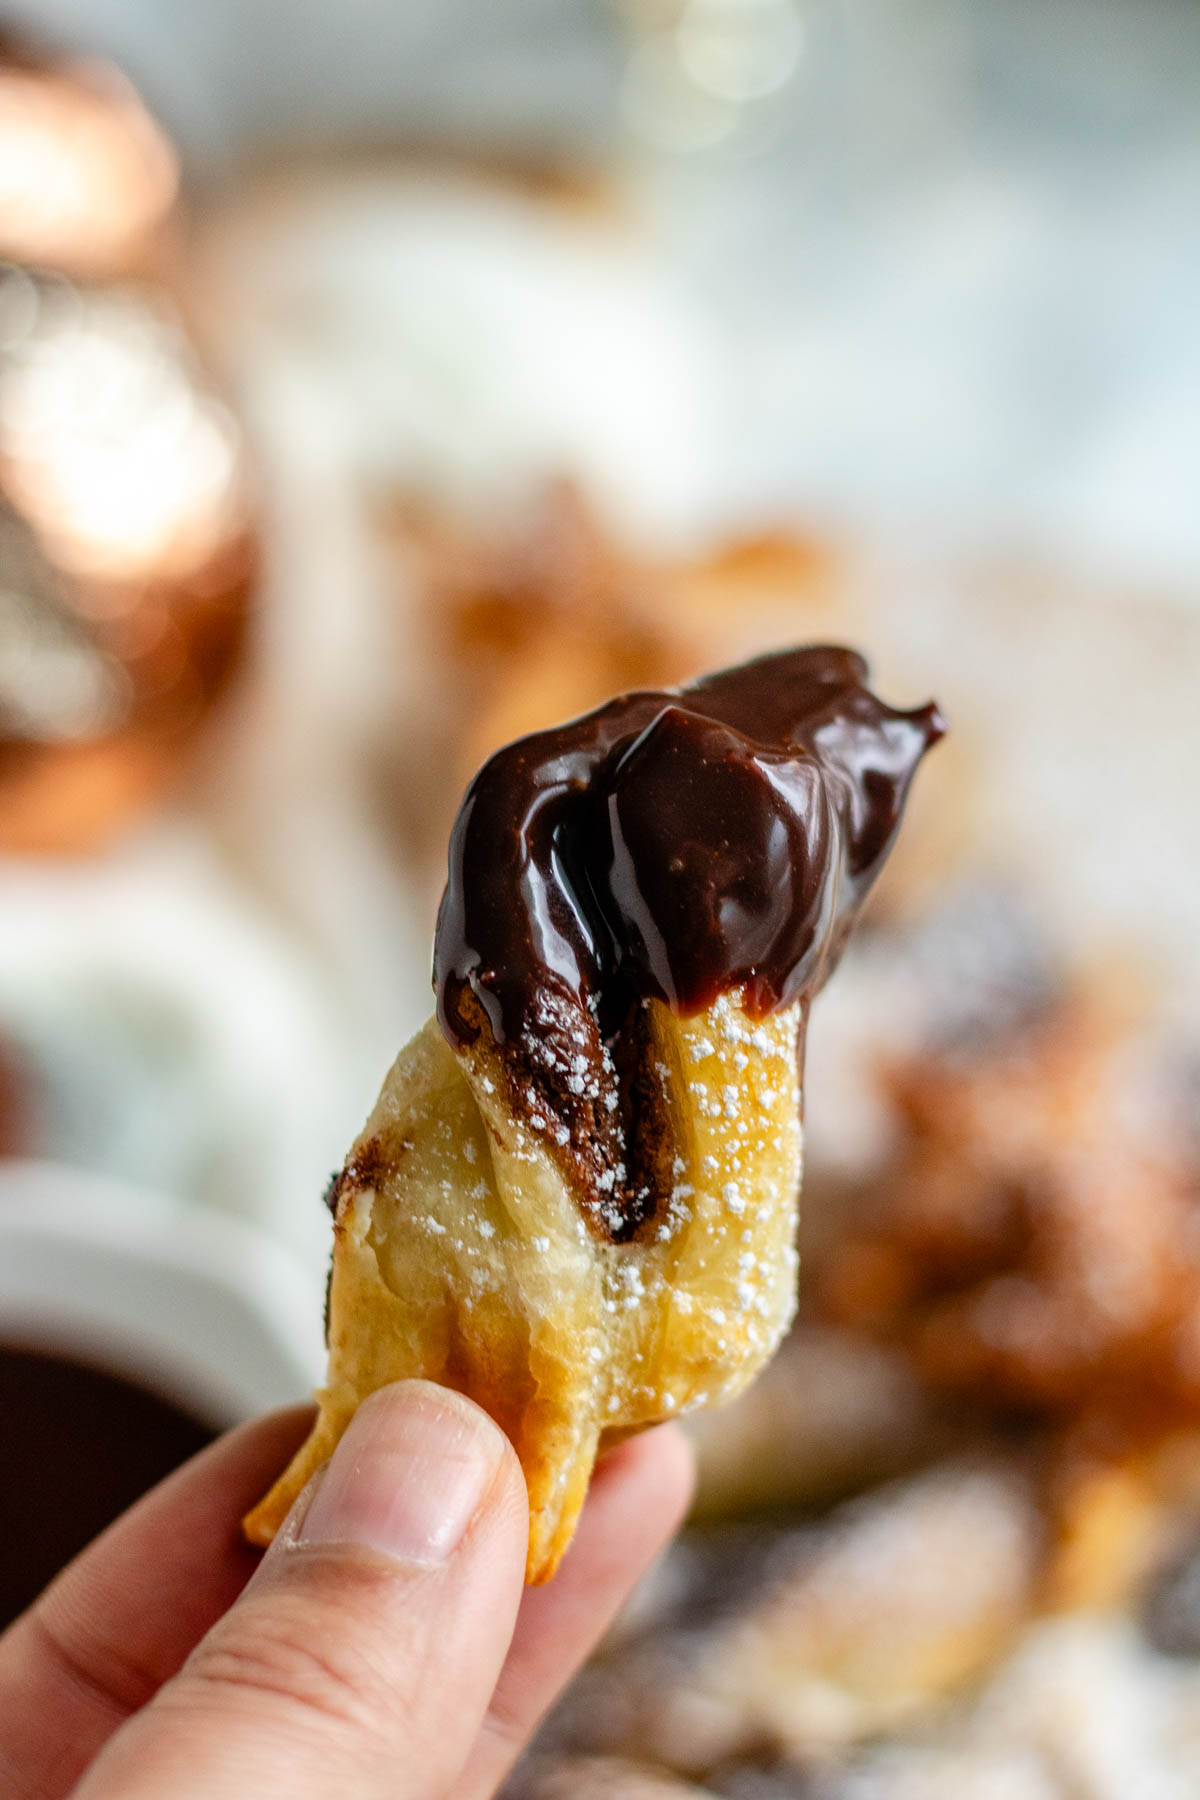 A piece of puff pastry with chocolate dip on it is held up by hand.